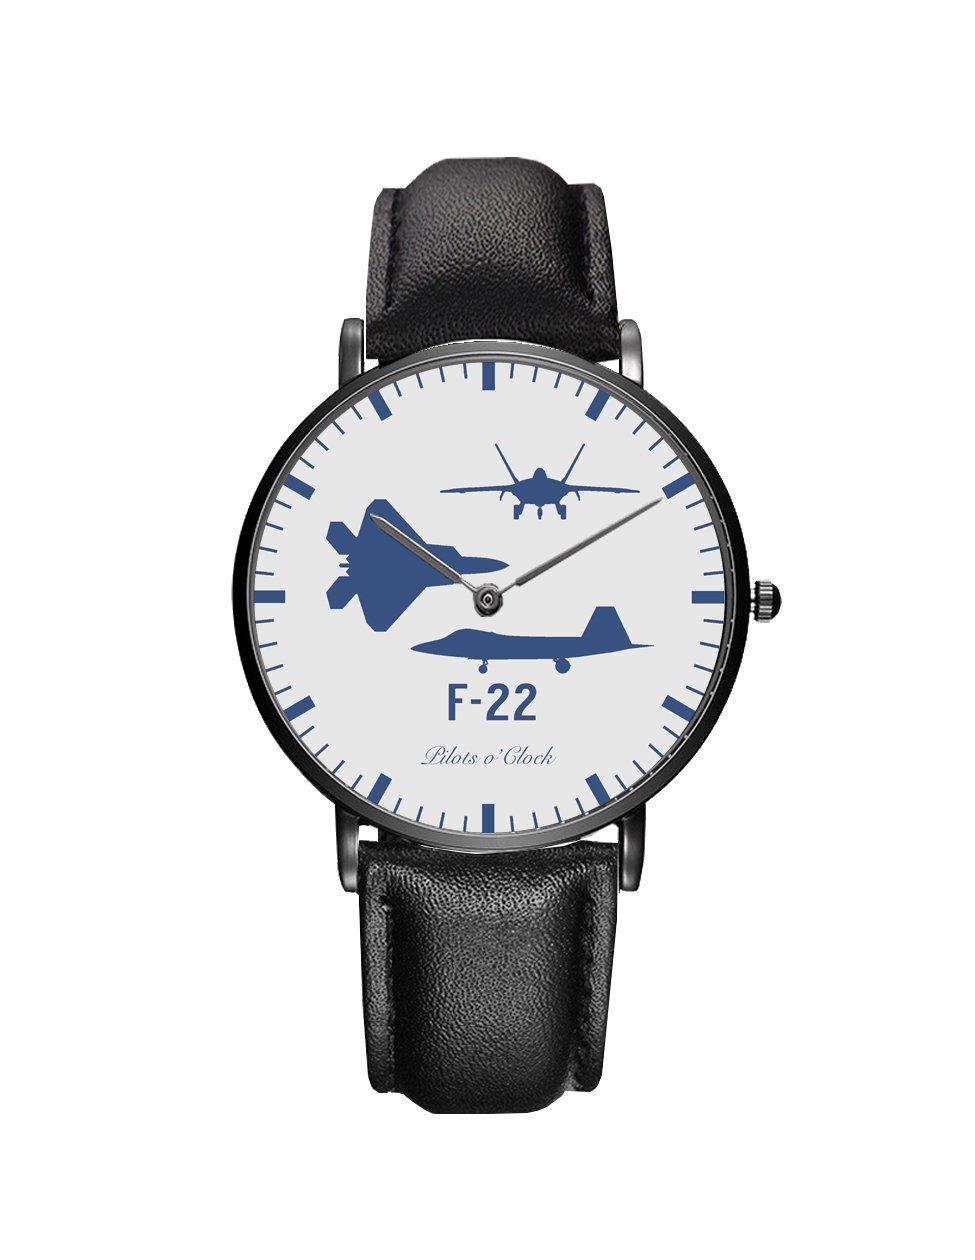 F22 Raptor (Special) Leather Strap Watches Pilot Eyes Store Black & Black Leather Strap 